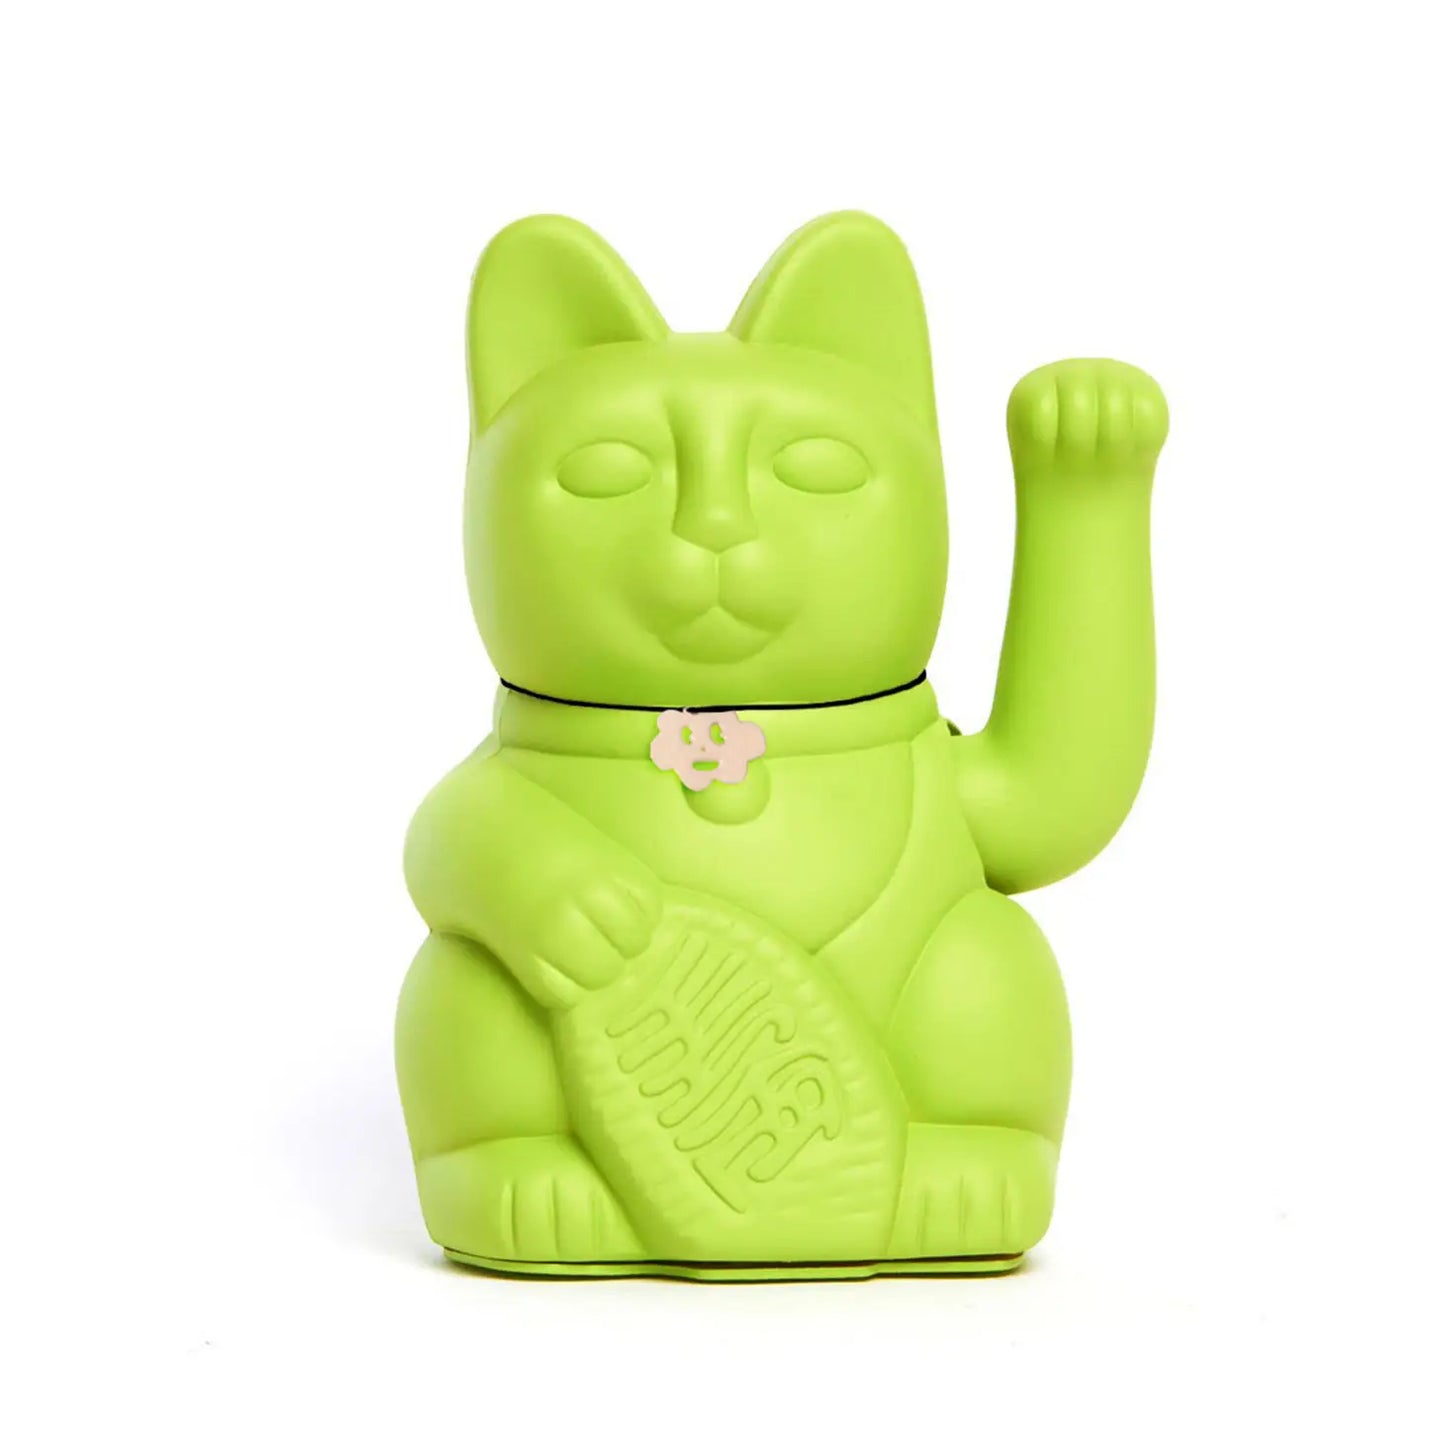 Waving Lucky Cat - Mojito Green - Good Luck To Your Children